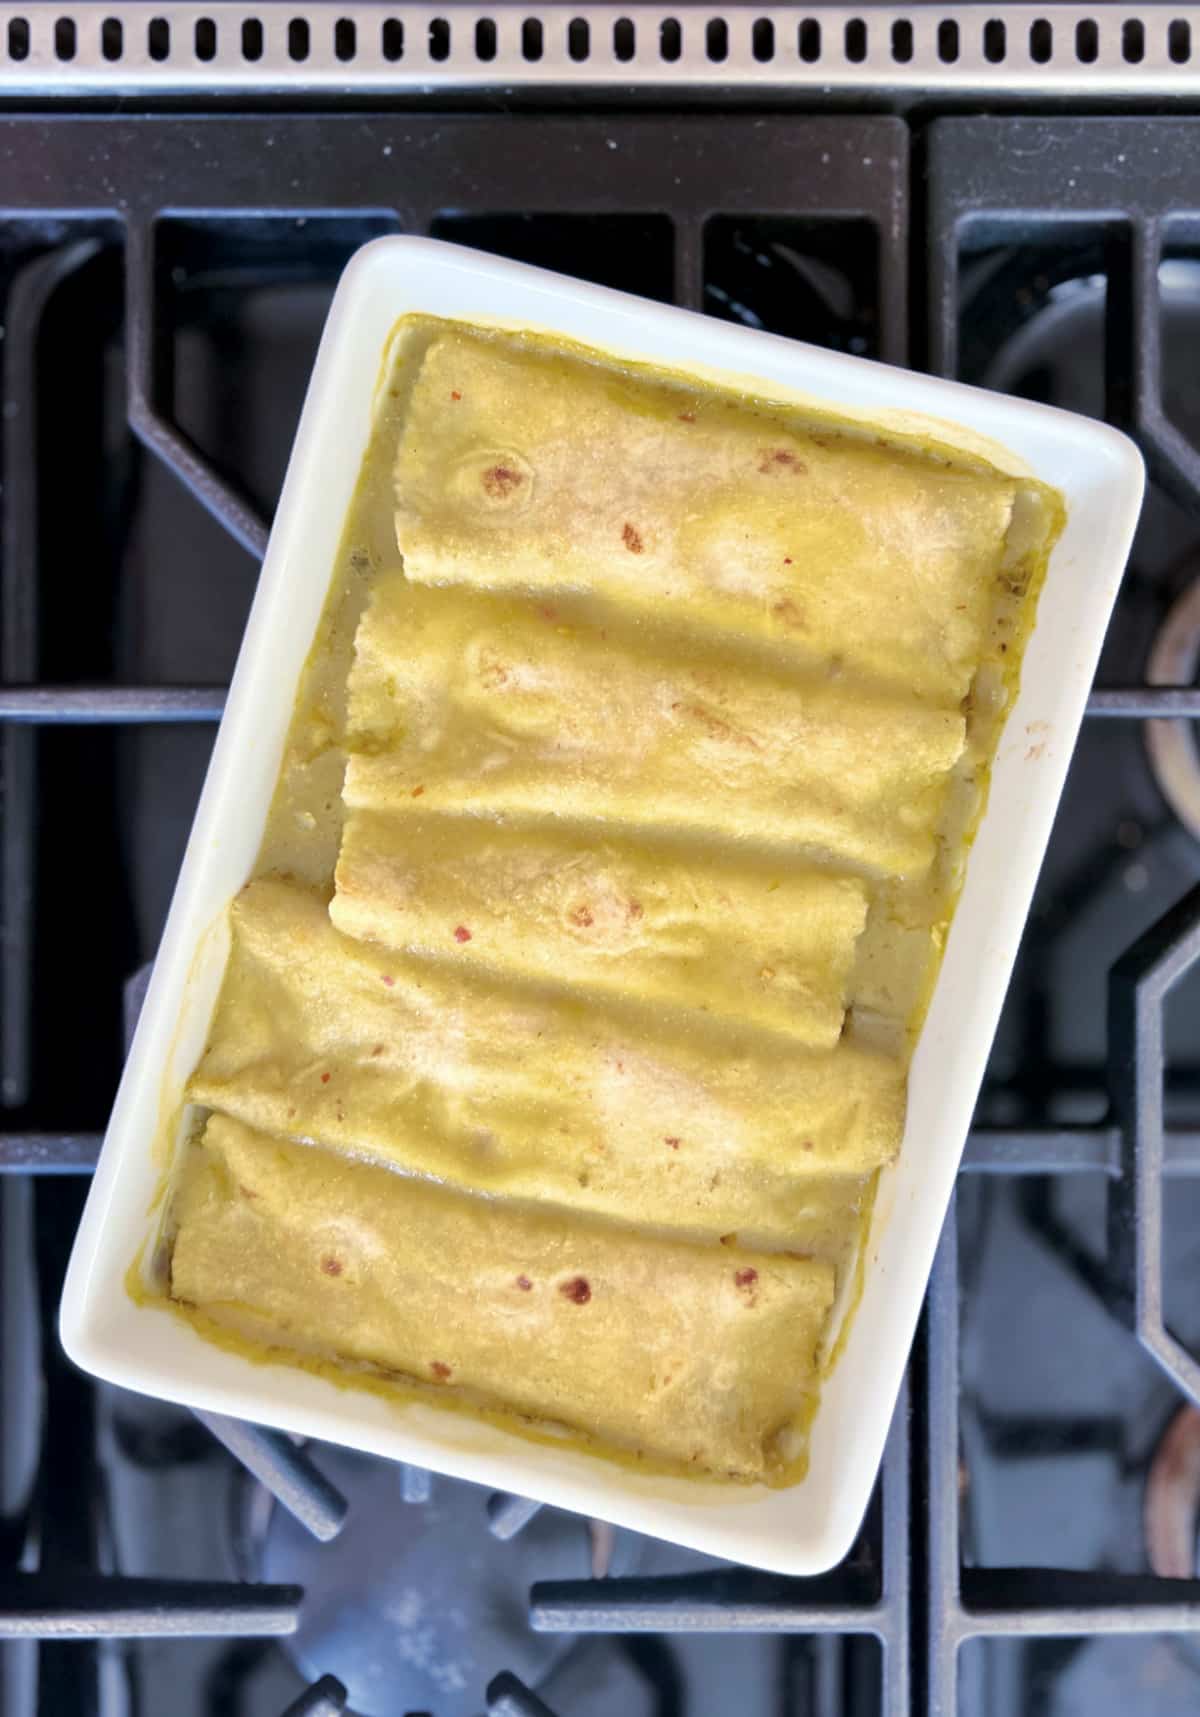 Overhead view of a white ceramic baking dish of breakfast enchiladas sitting on a cooktop. Five enchiladas lined up and covered with green enchilada sauce, fresh baked just out of the oven.